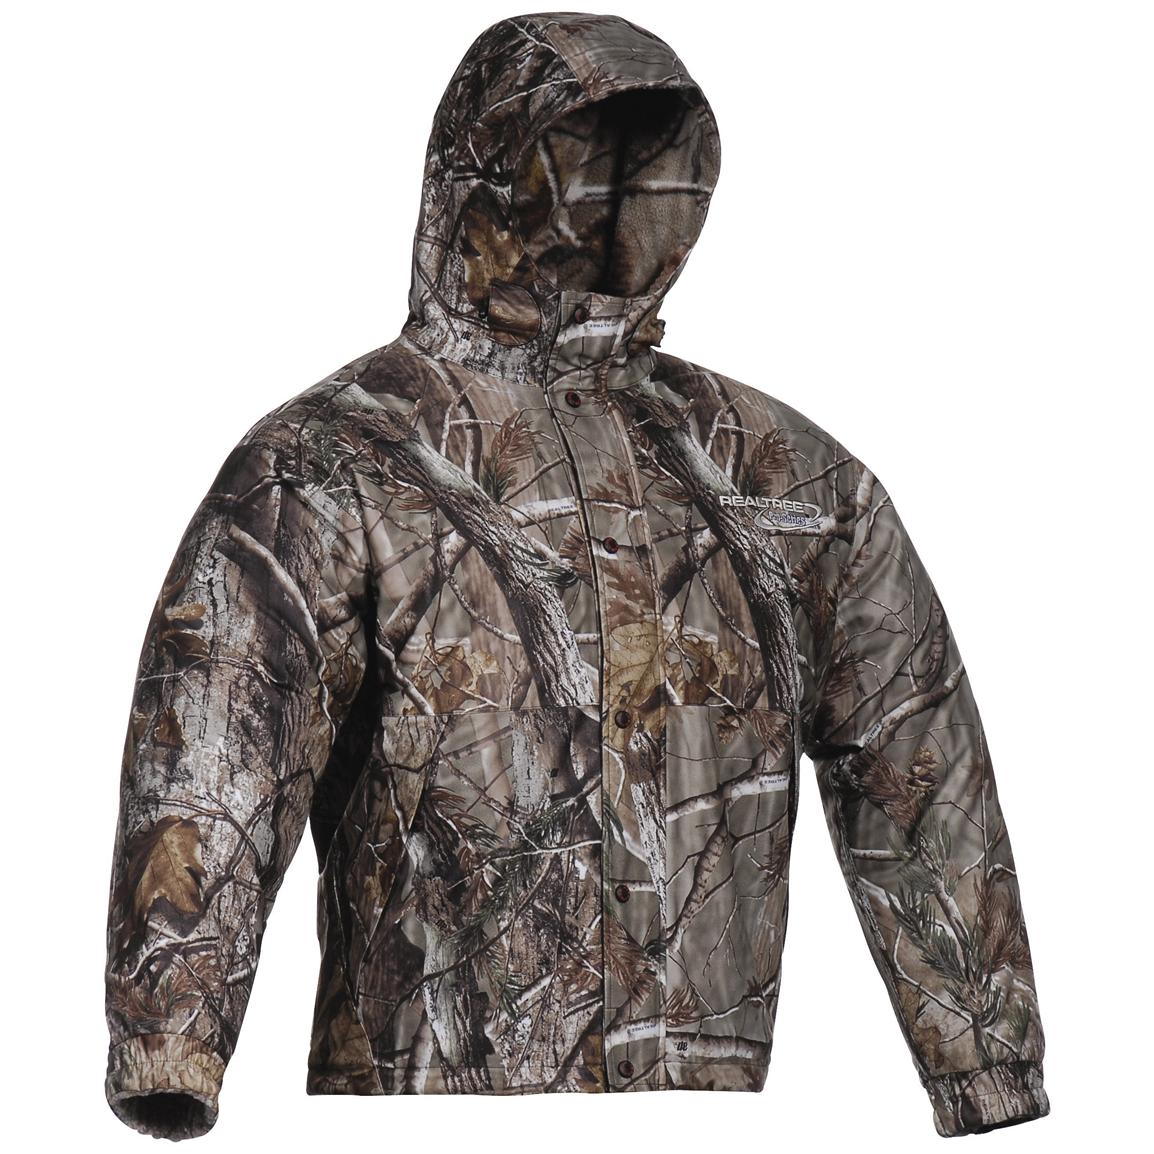 Whitewater® Reversible Jacket - 166603, Camo Jackets at Sportsman's Guide